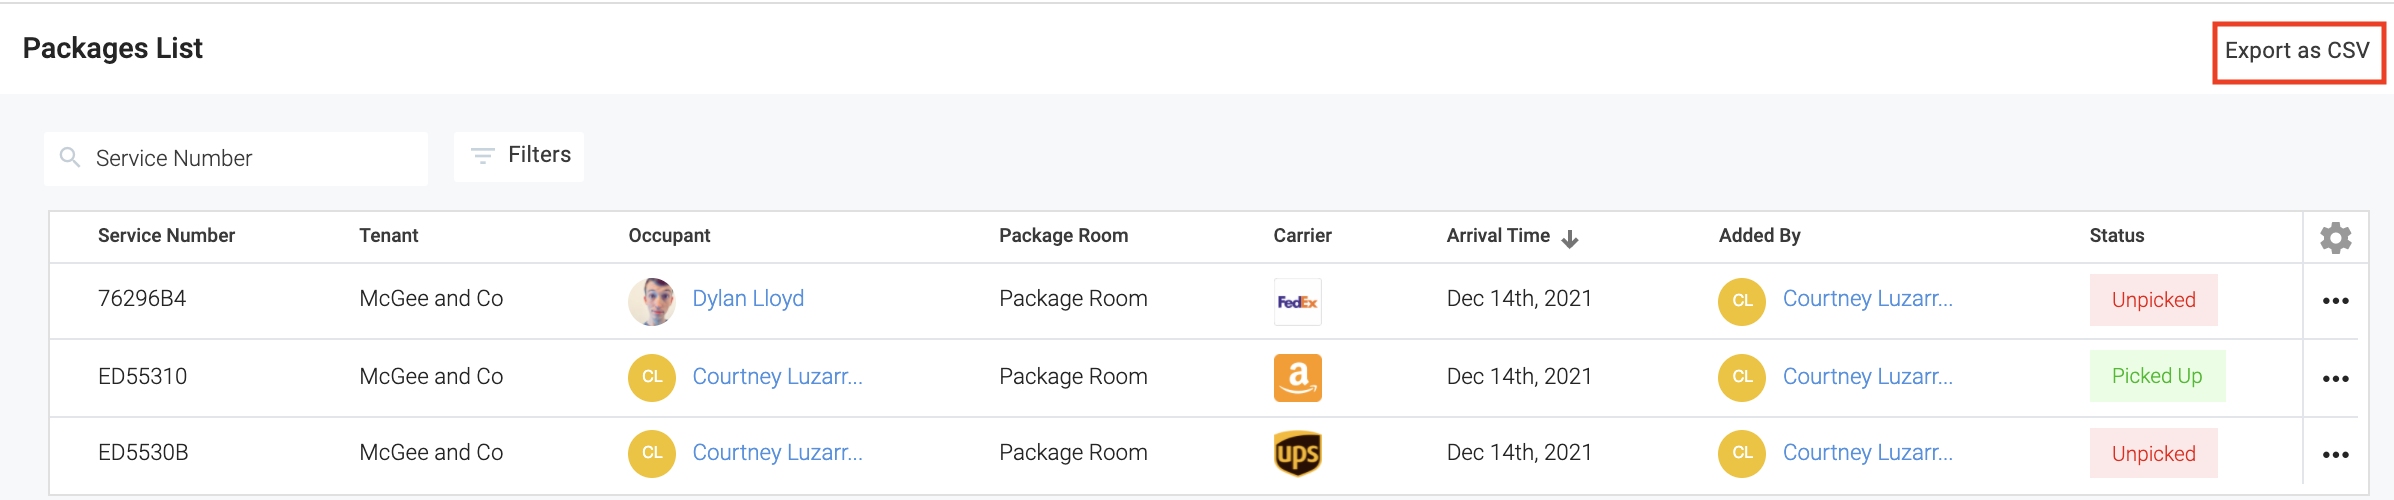 Packages_List_Export_Com.png